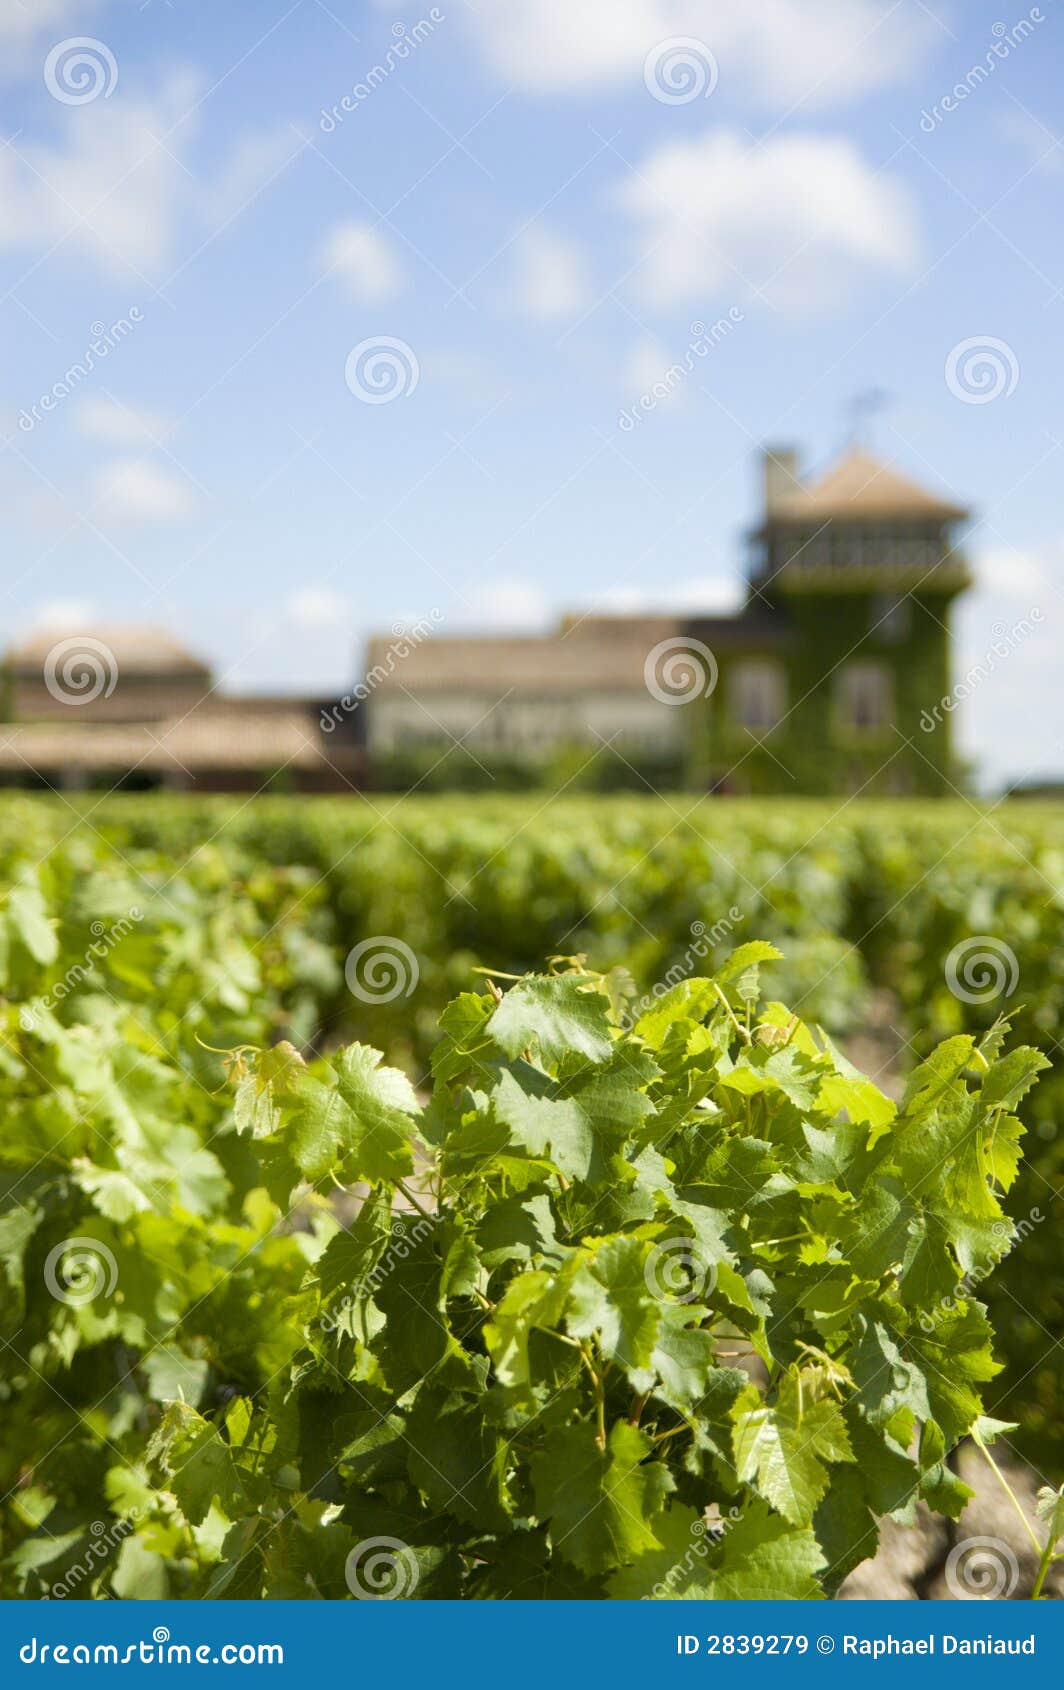 Royalty Free Stock Images: Vineyard in France, Bordeaux